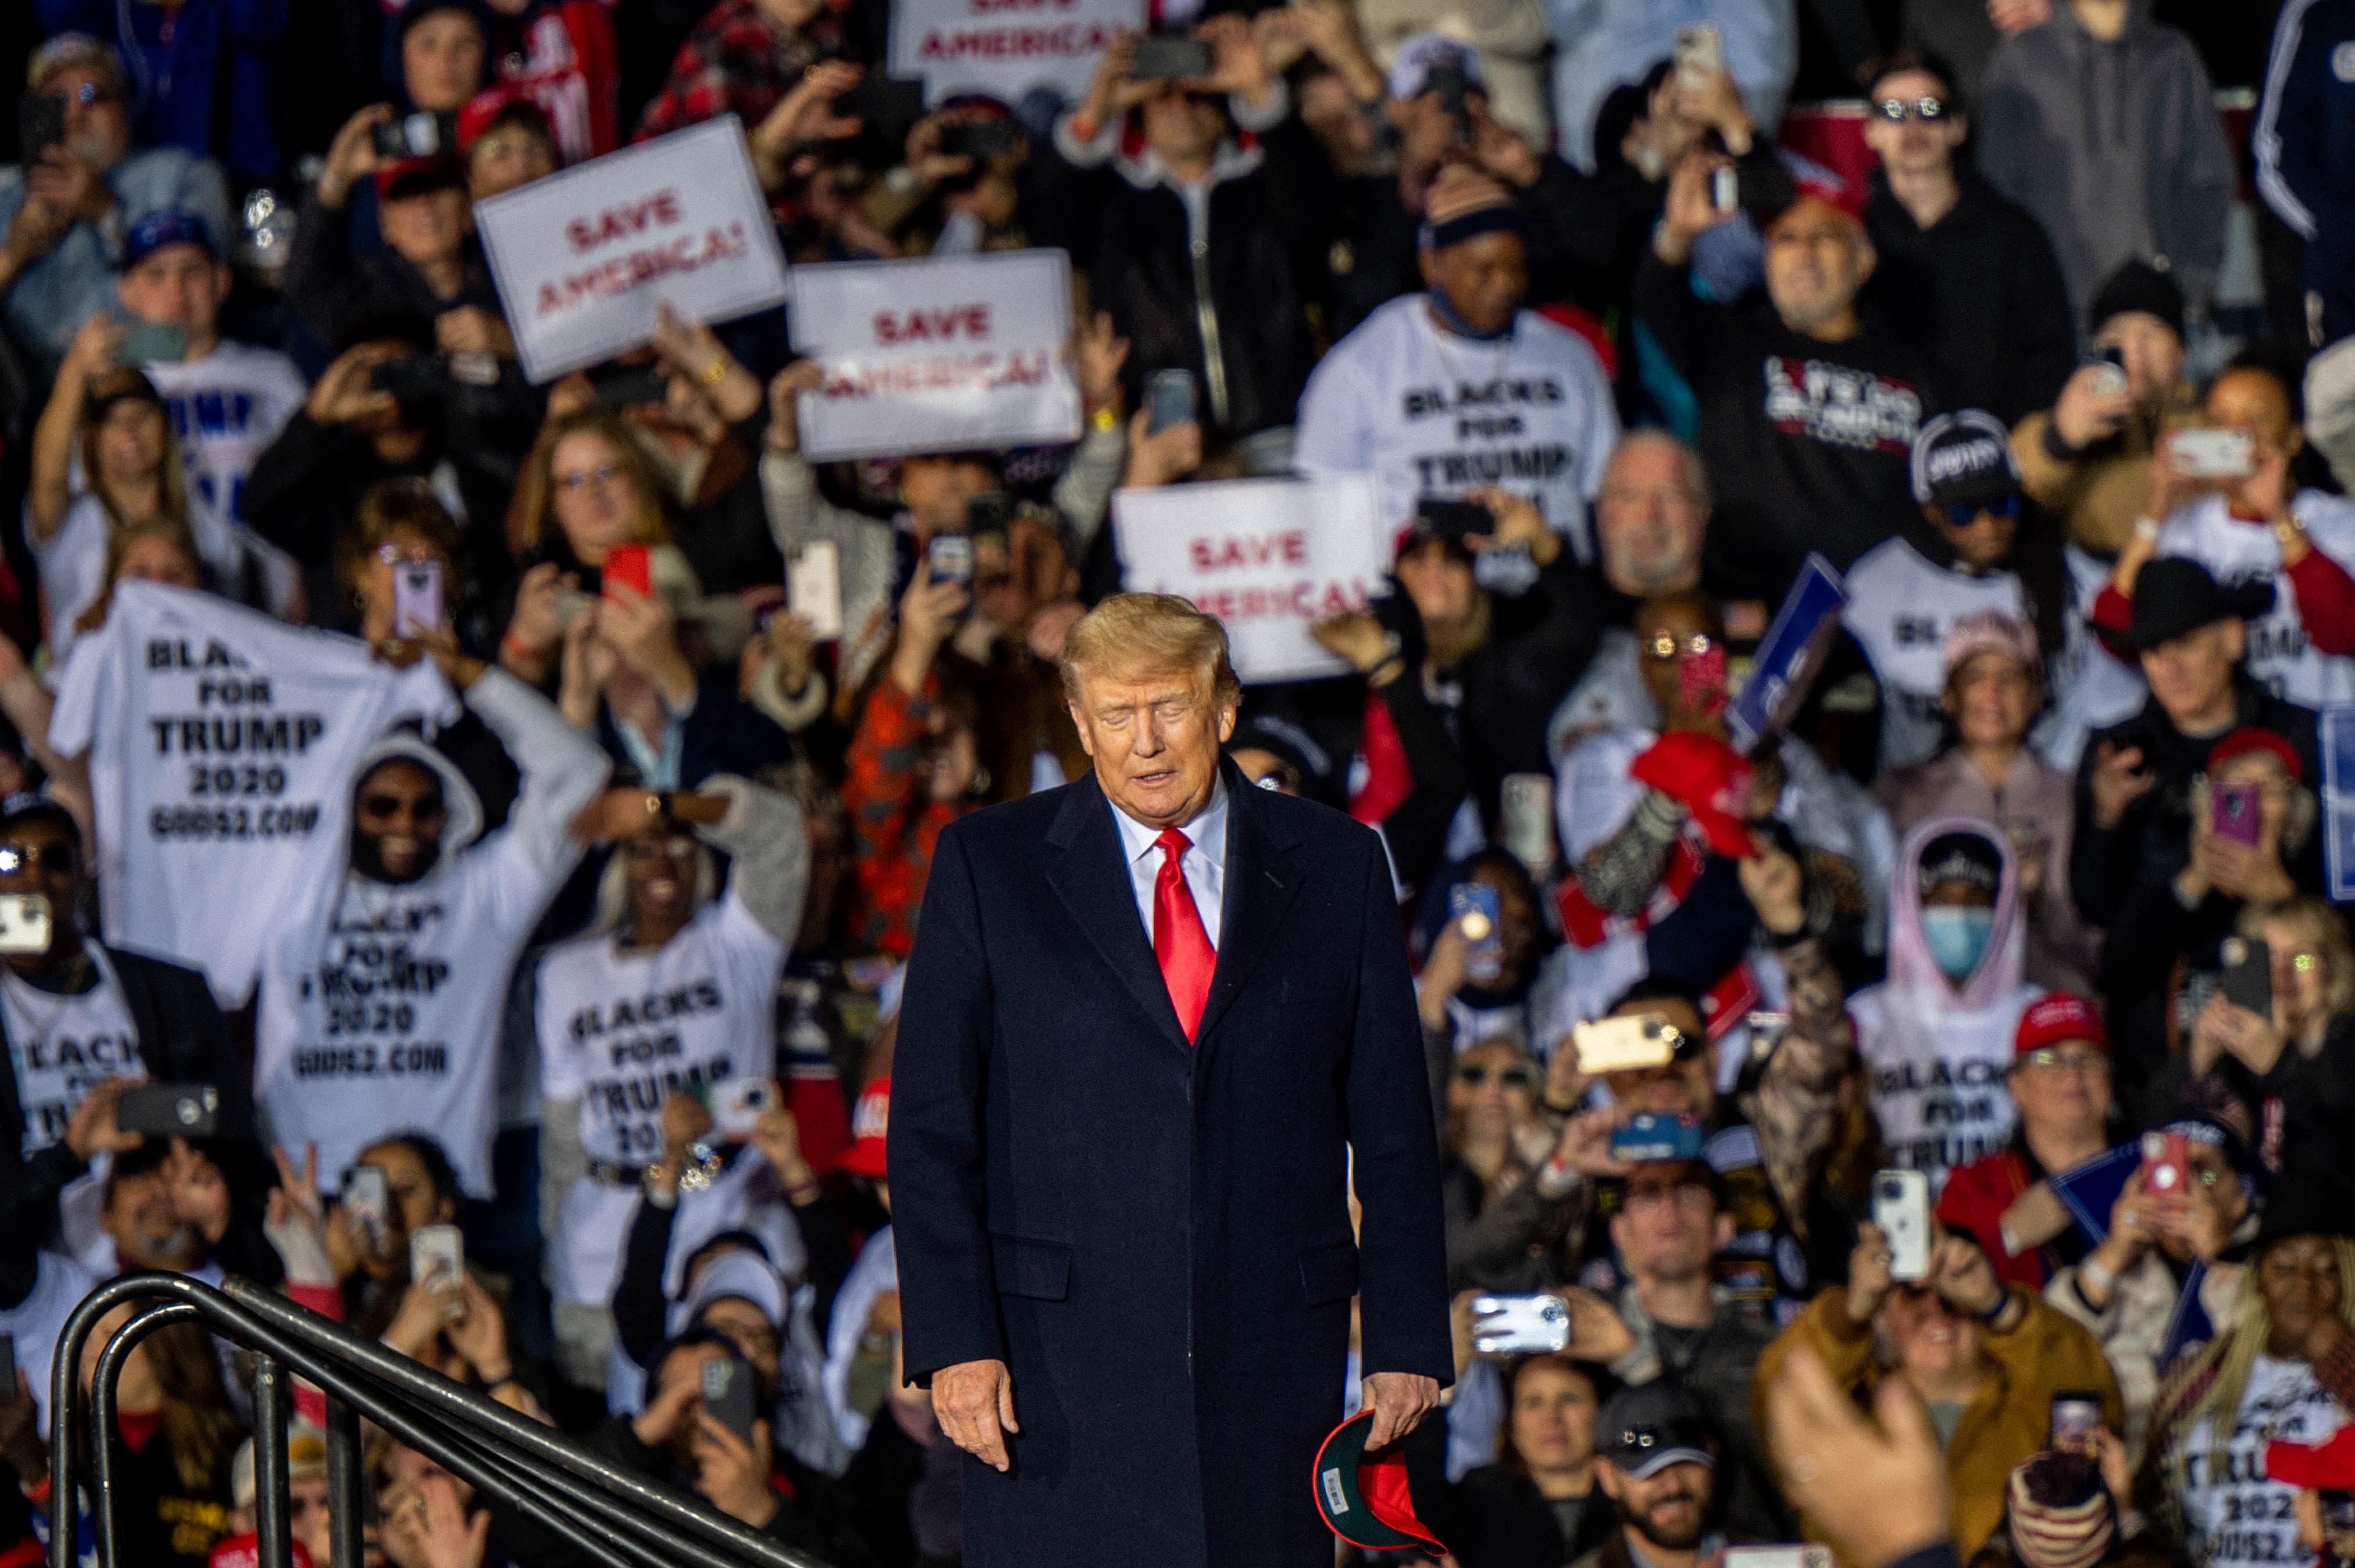 Former President Donald Trump arrives during the "Save America" rally at the Montgomery County Fairgrounds on Saturday, Jan. 29, 2022 in Conroe, Texas. Trump's visit was his first Texas MAGA rally since 2019.